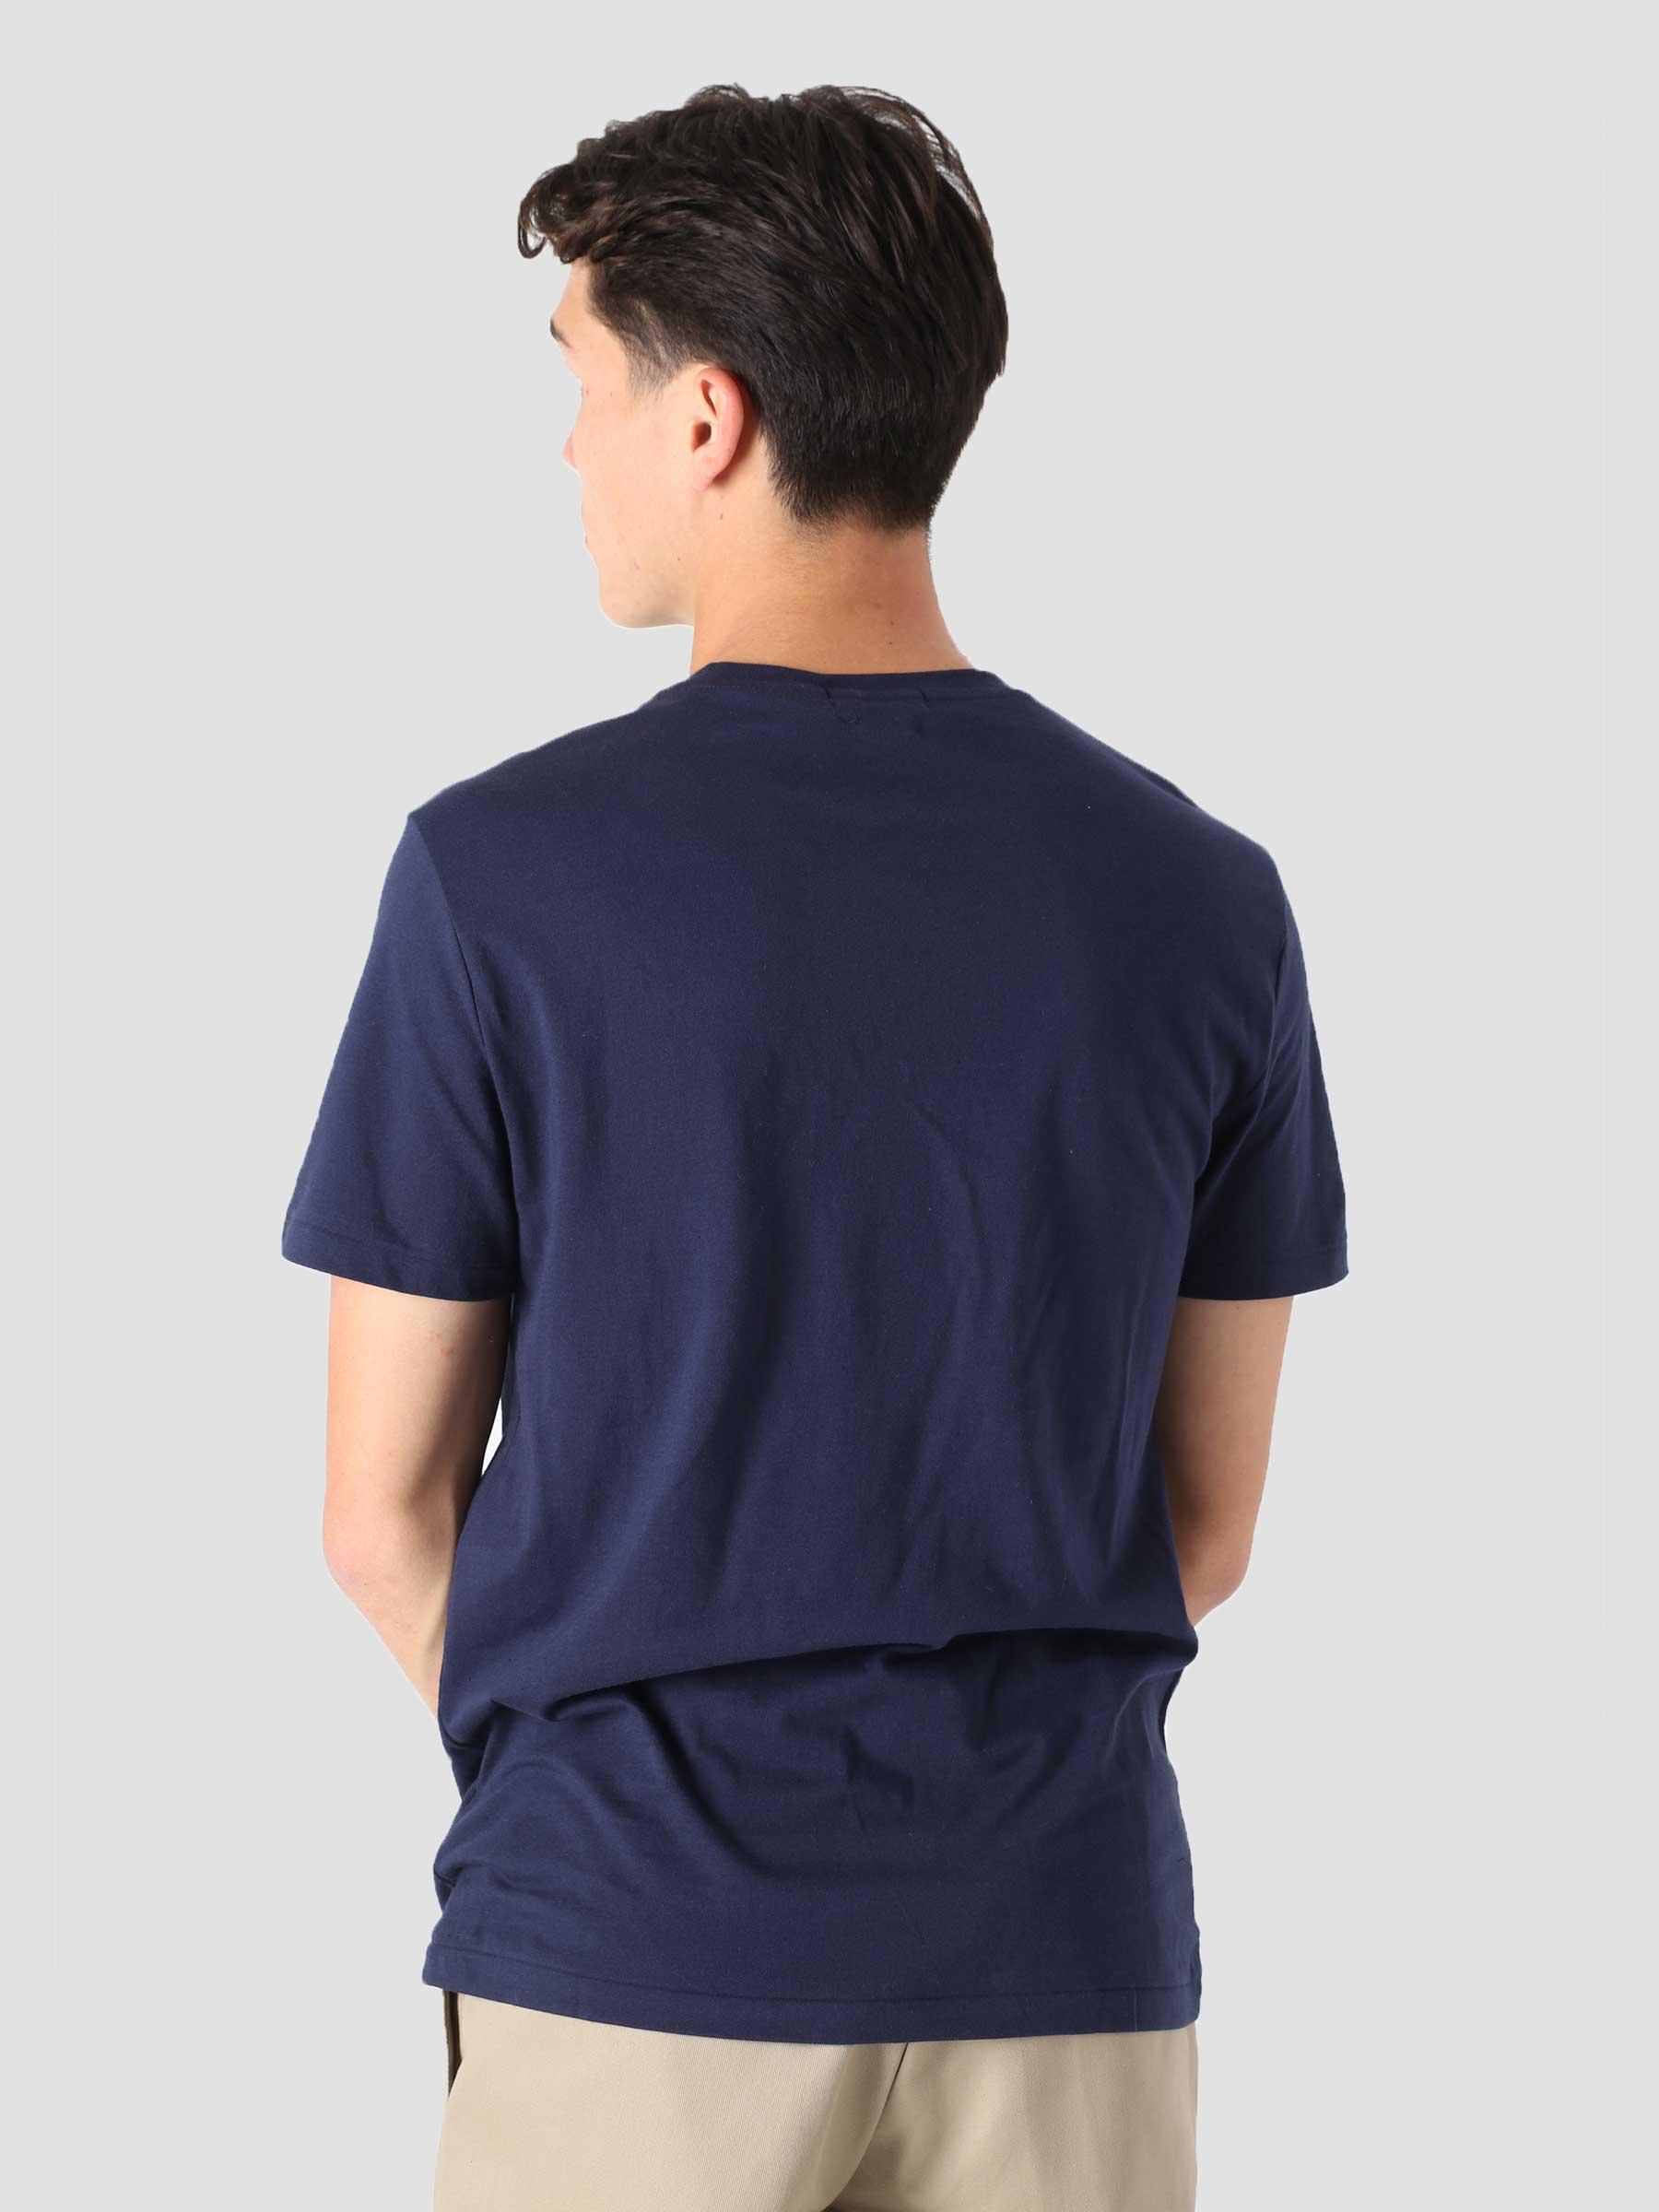 26-1 Jersey Short Sleeve T-Shirt French Navy 710853310002